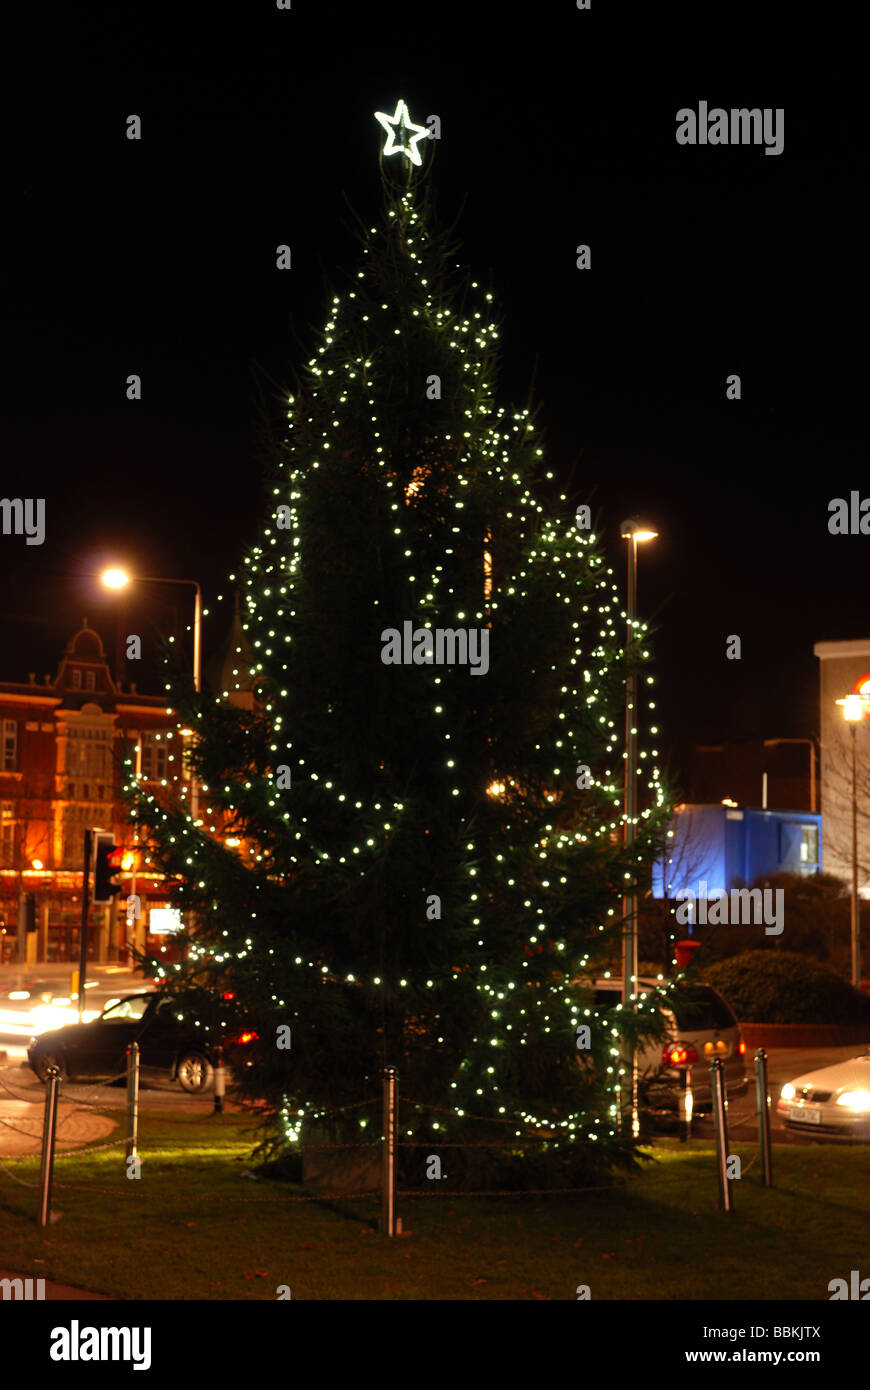 CHRISTMAS DECORATIONS ON CHRISTMAS TREE IN WANSTEAD VILLAGE LONDON PHOTOGRAPHED AT NIGHT Stock Photo